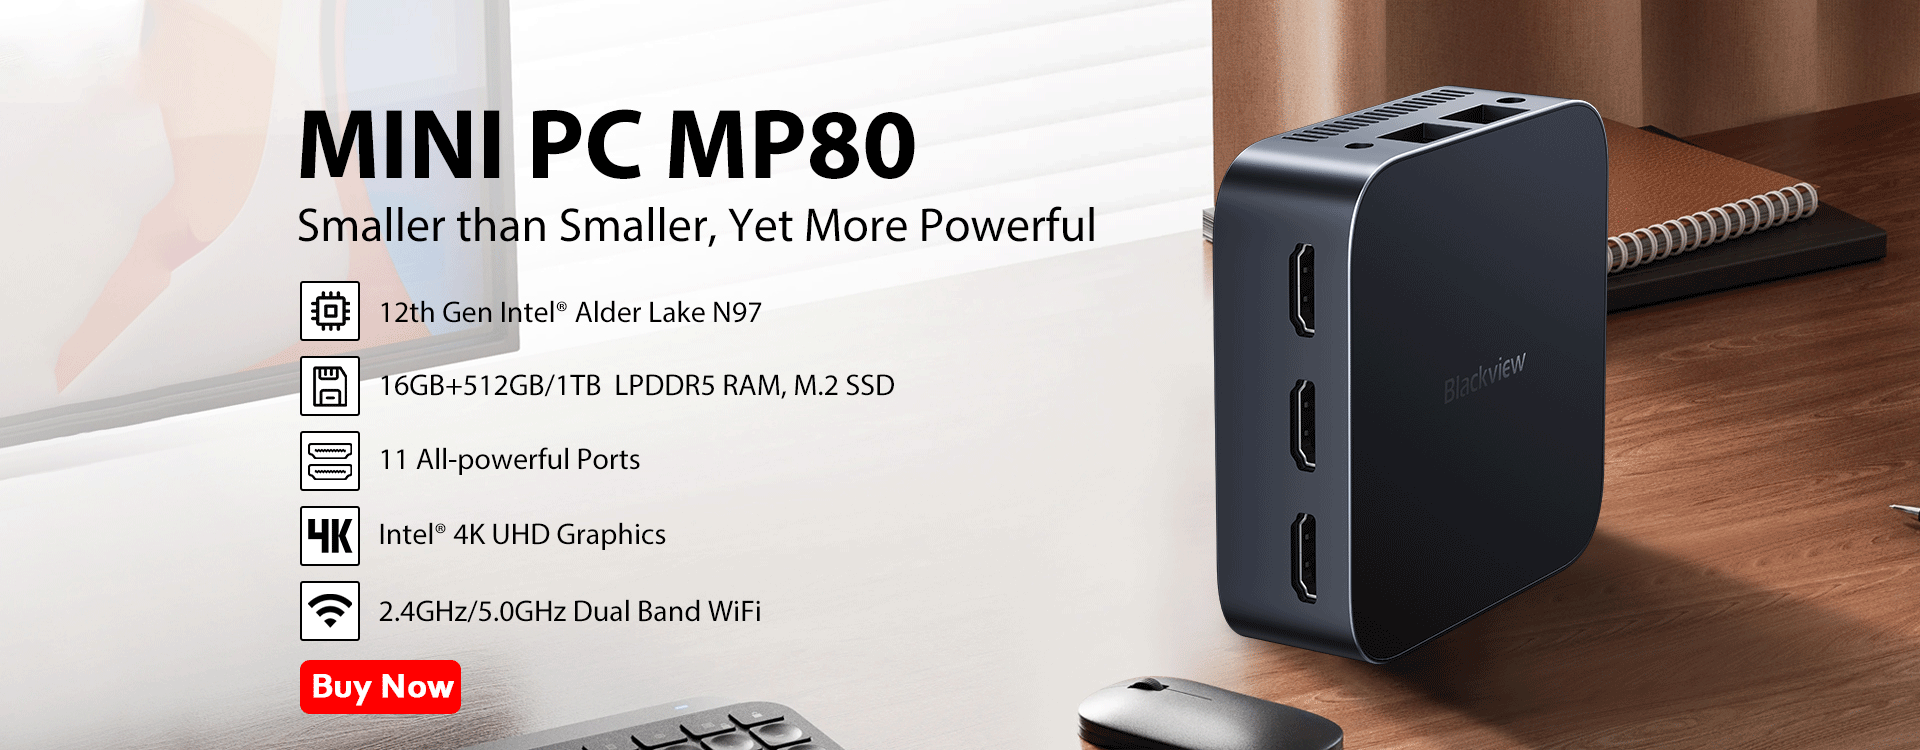 Blackview MP80 Mini PC review – tiny but capable - The Gadgeteer